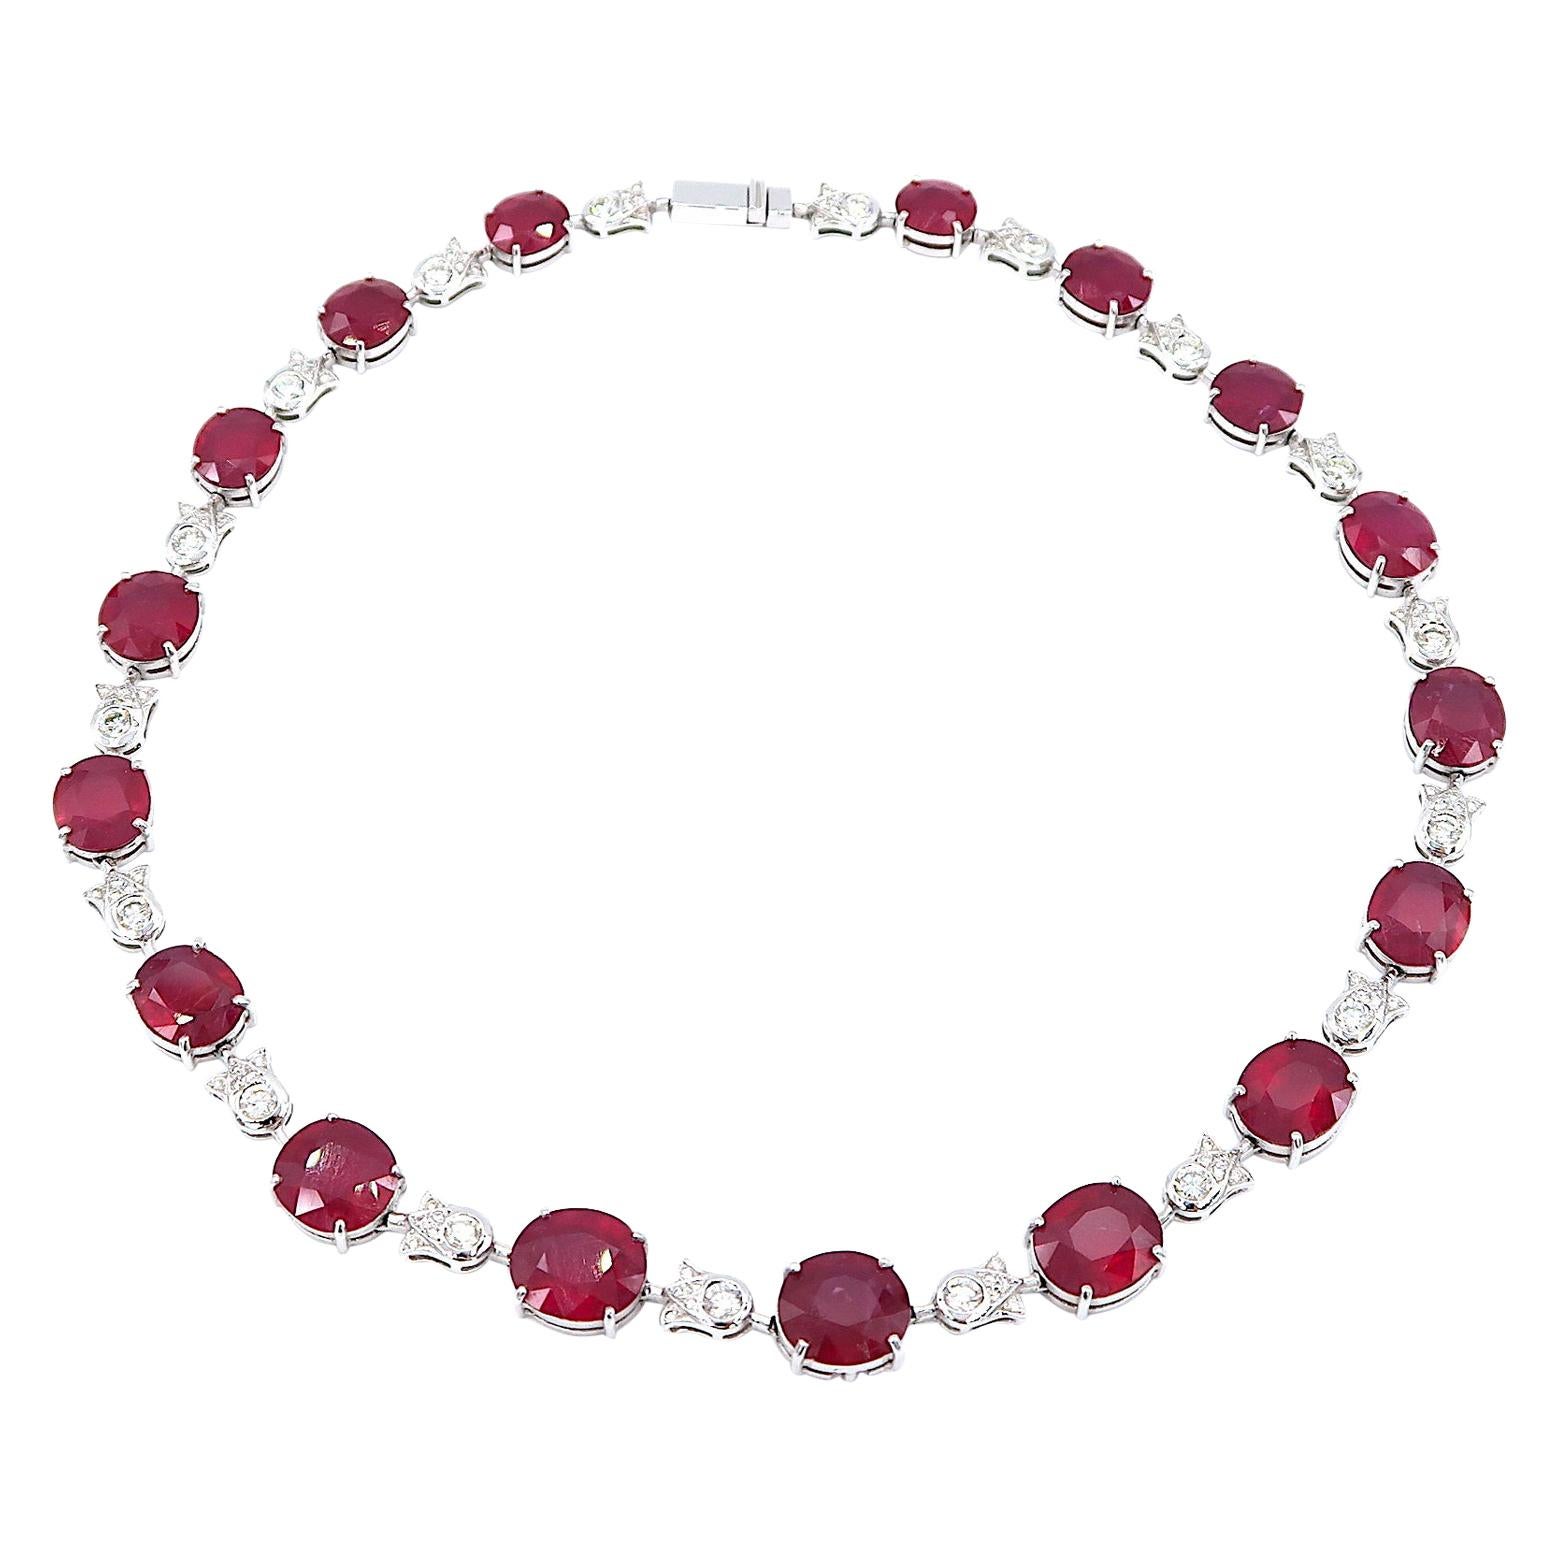 Single Strand Oval Ruby Necklace in 18K White Gold embellished with Diamonds

Ruby: 64.61 total carat
Diamond: 3.64 ct
Gold: 18K White Gold, 33.565